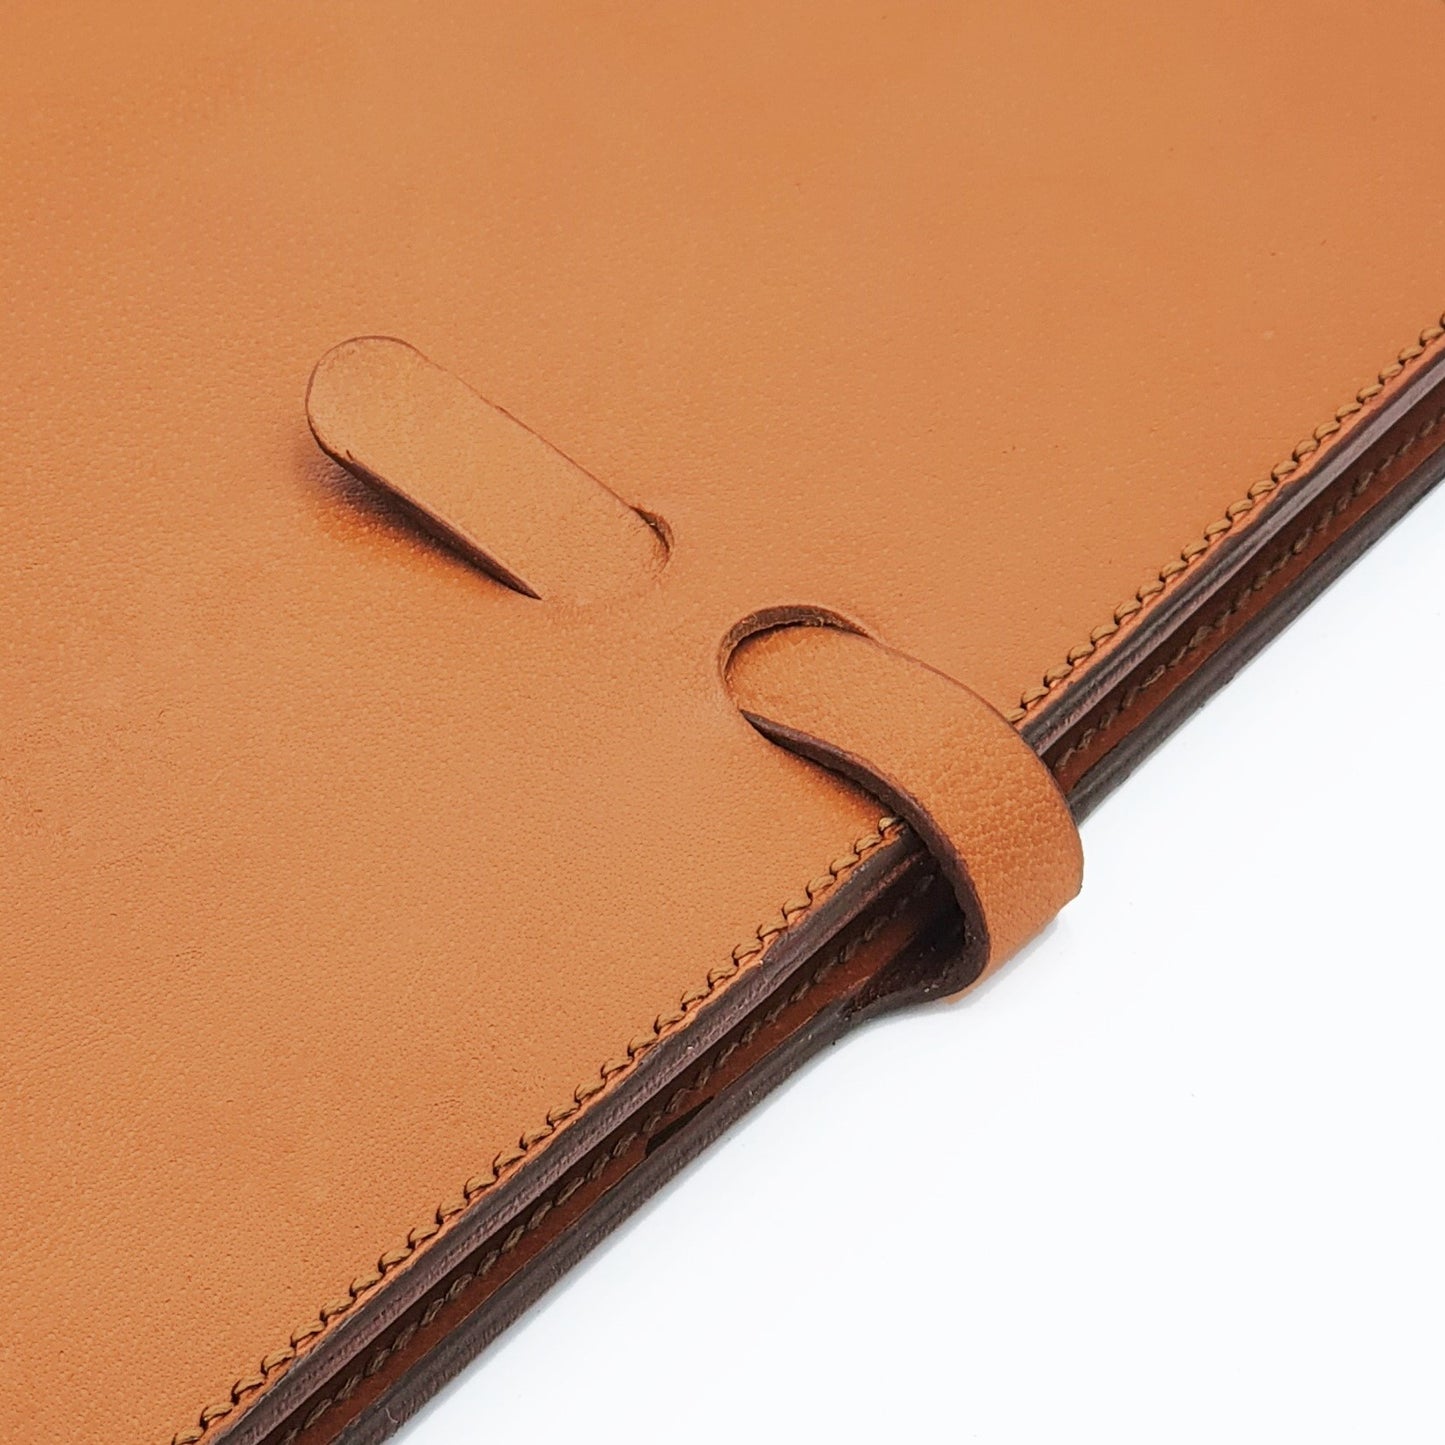 PICCOLO B5-P Traveller's Notebook Sleeve